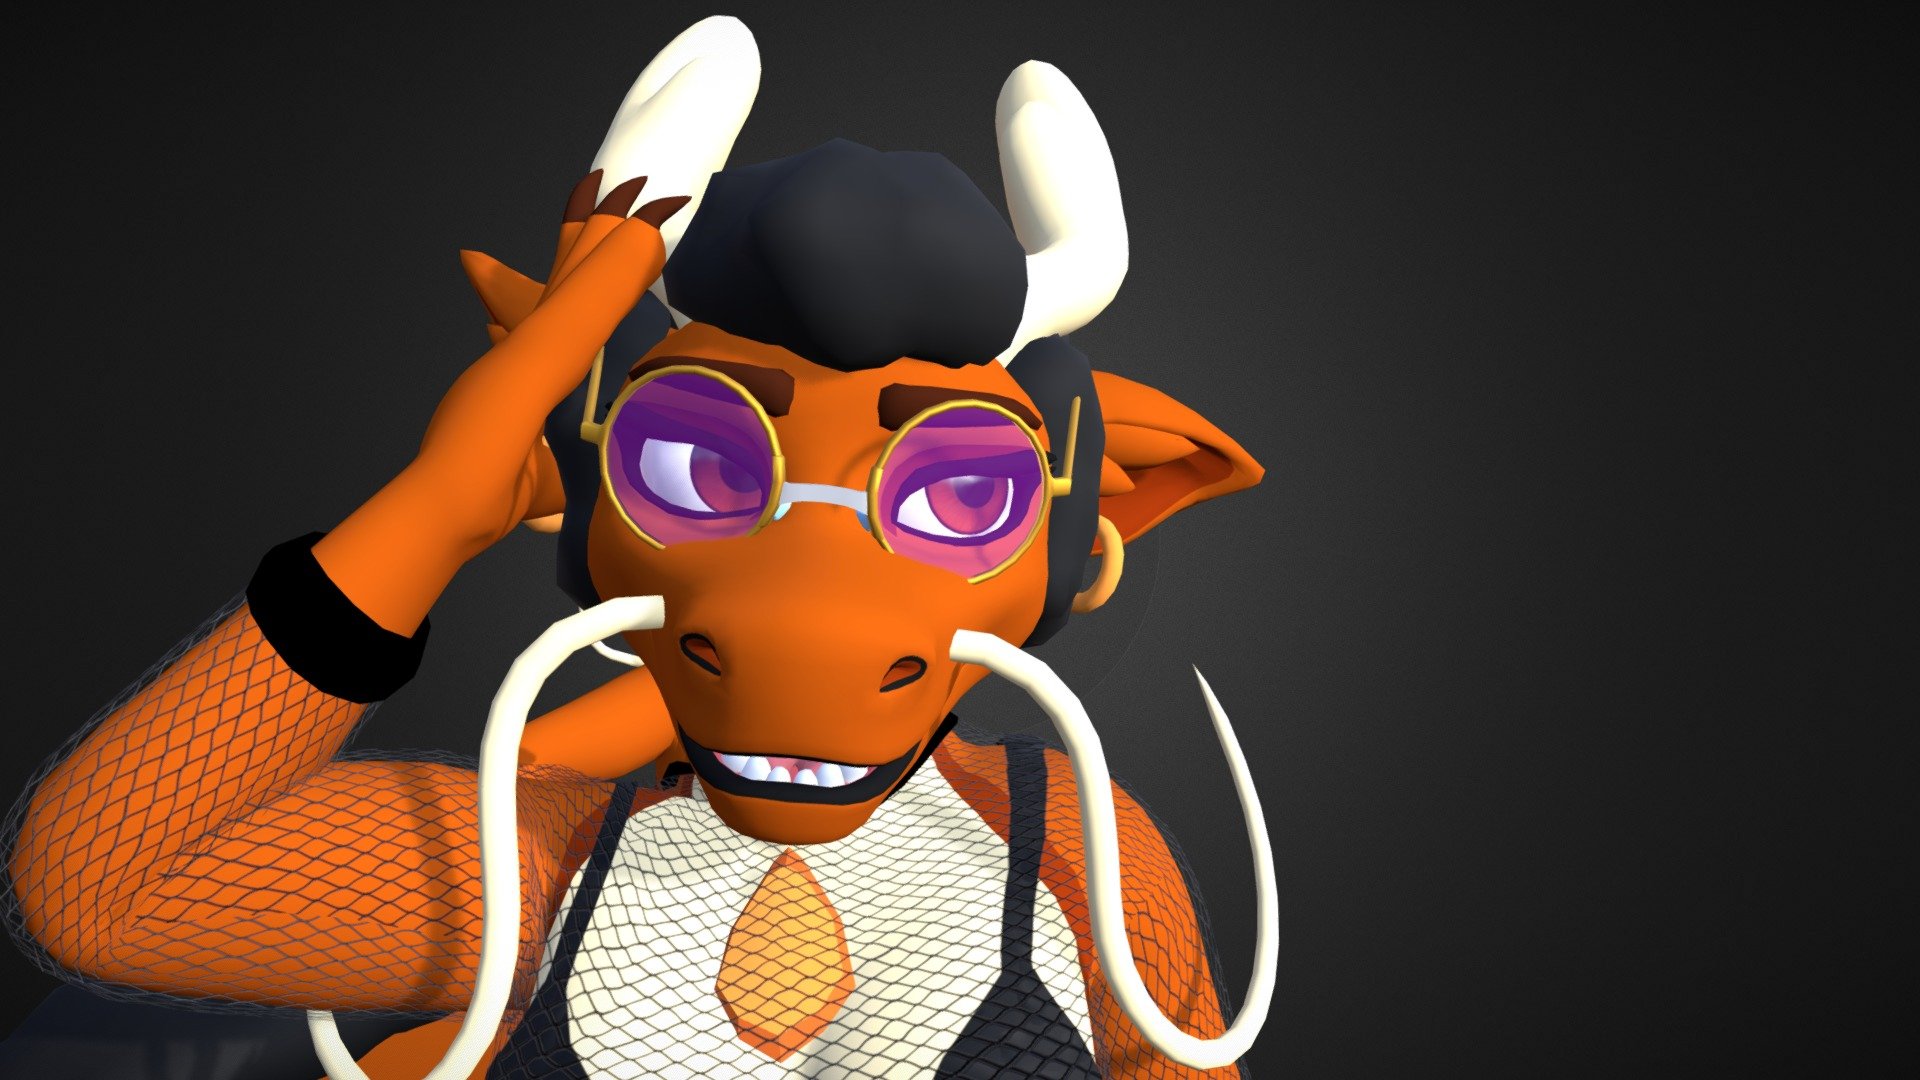 This is custom avatar for Vtubing and for VR Chat.

Find this and more of my work on my twitter:@kaideart

This model is NOT for download, it is a custom commission

If you’d like to me commission for a model of yourself, check out https://kaide.art for info! - Erica - 3D model by Kaide 3d model